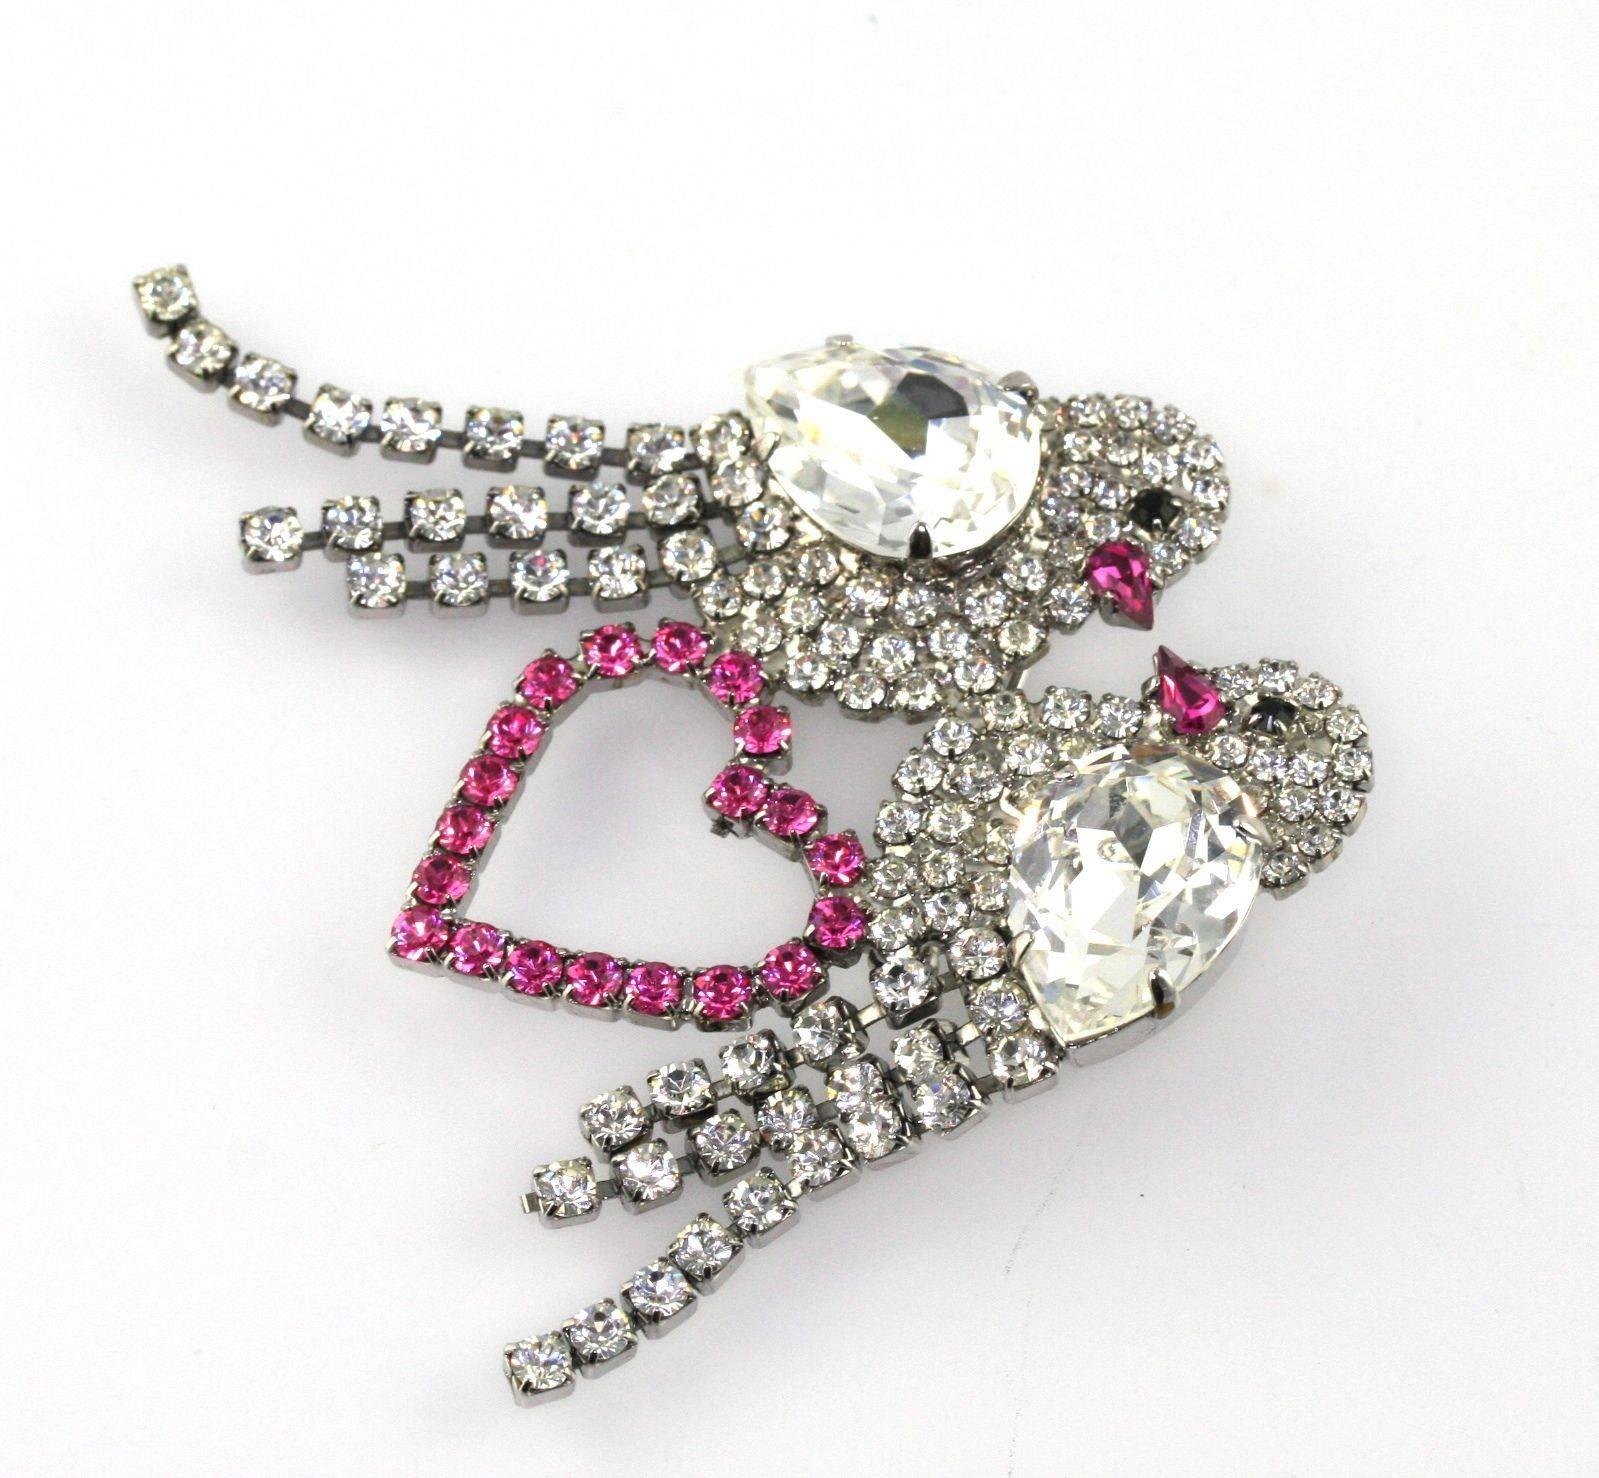 Vintage Butler & Wilson Rhinestone Lovebirds Heart Brooch Pin brooch featuring two clear crystal chaton rhinestone birds with trailing rhinestone fringe tails, perched atop a pink rhinestone heart; large pear shaped clear rhinestone wings, pink pear